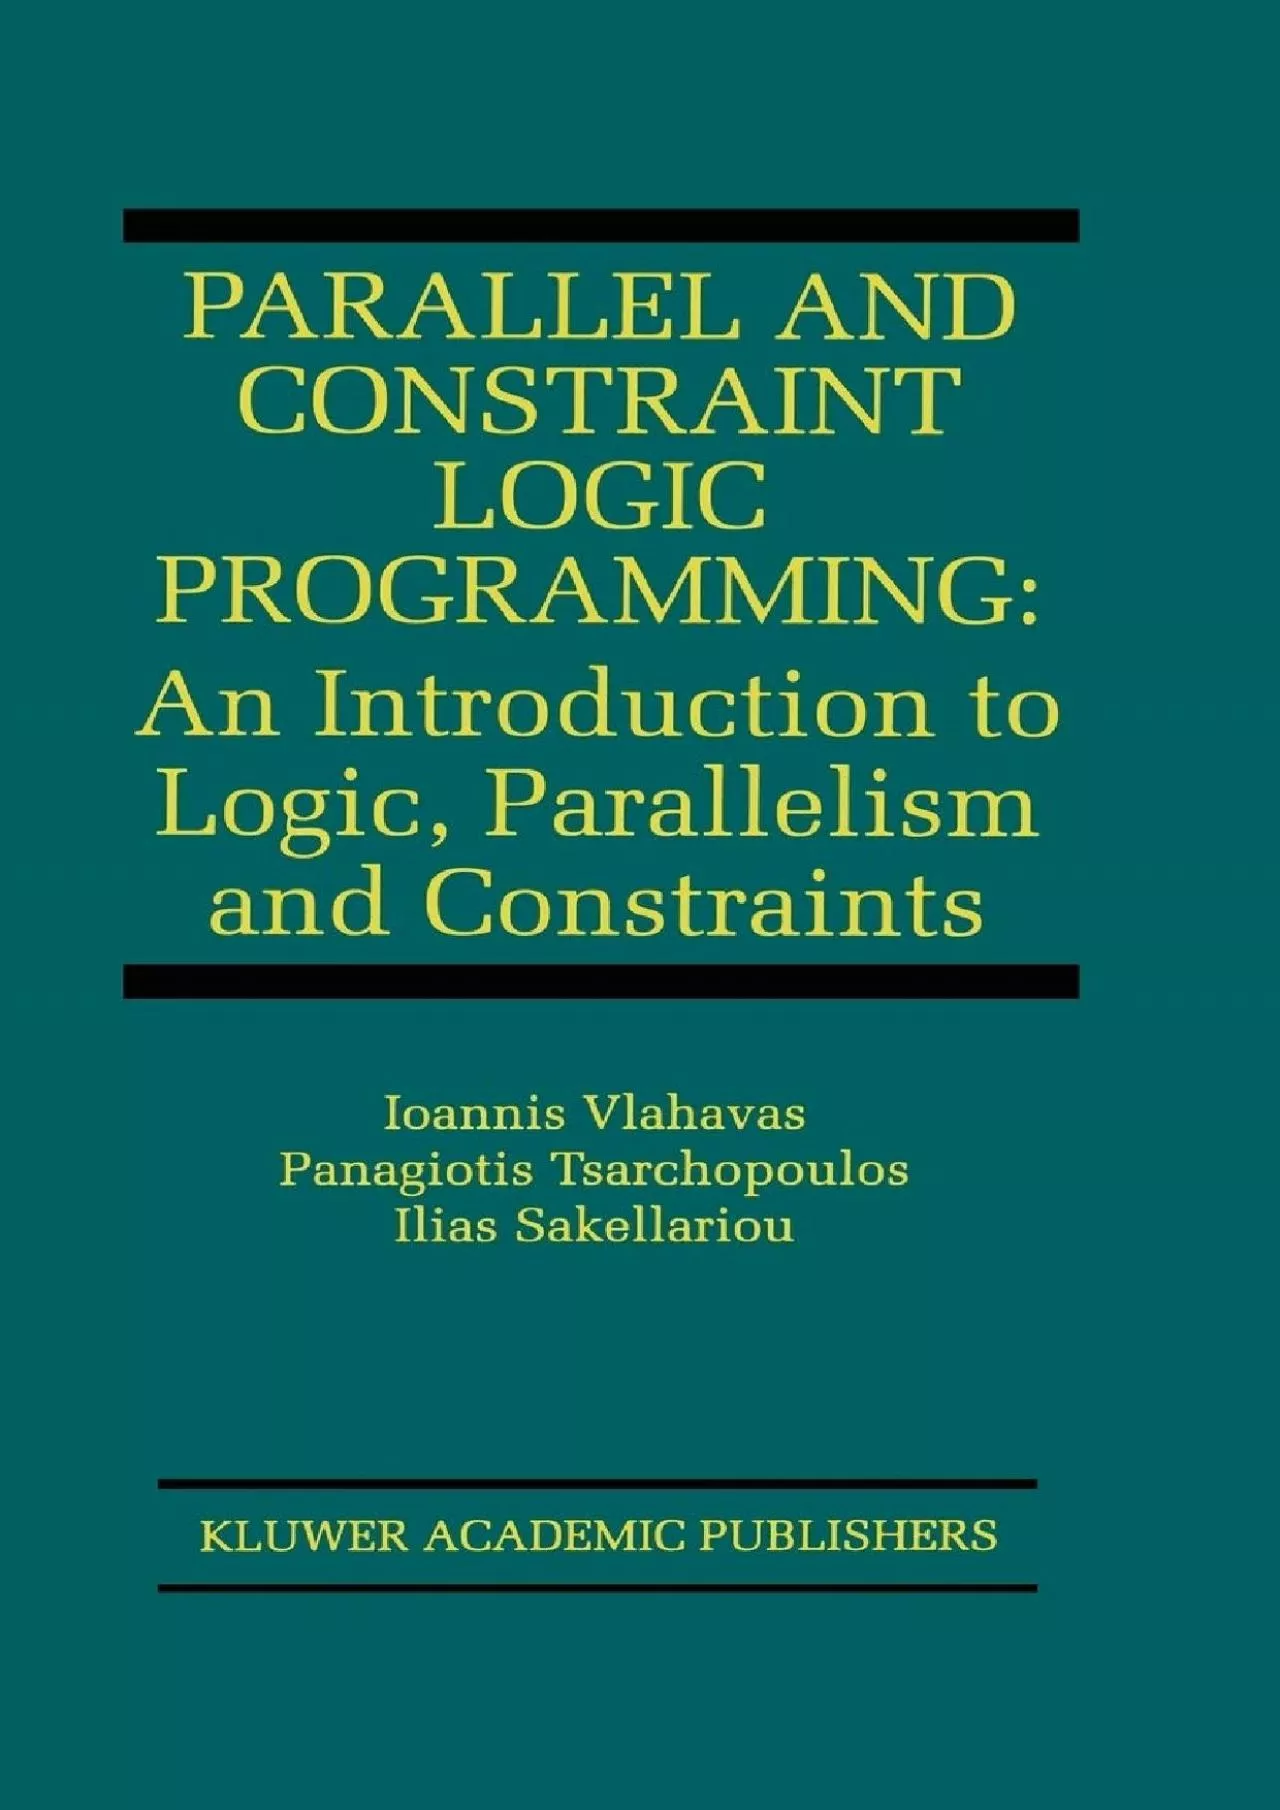 [PDF]-Parallel and Constraint Logic Programming: An Introduction to Logic, Parallelism